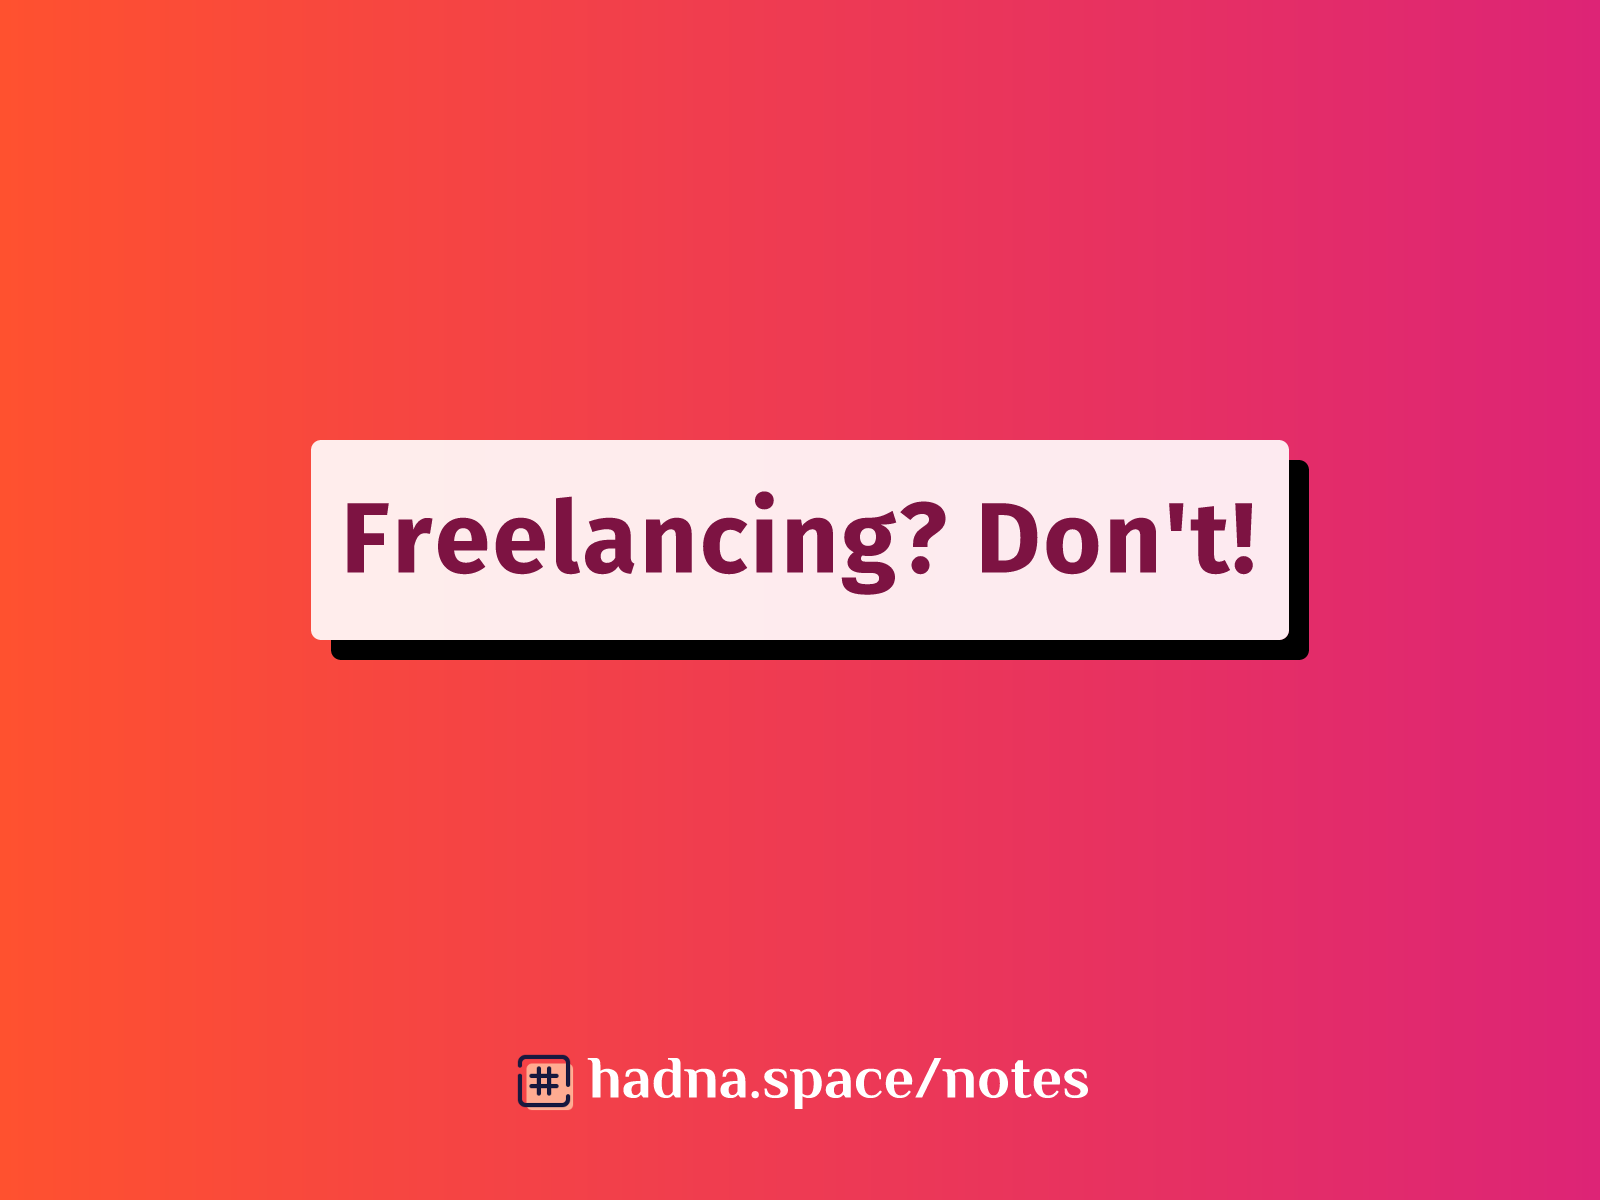 Why Should You NOT Do Freelancing?